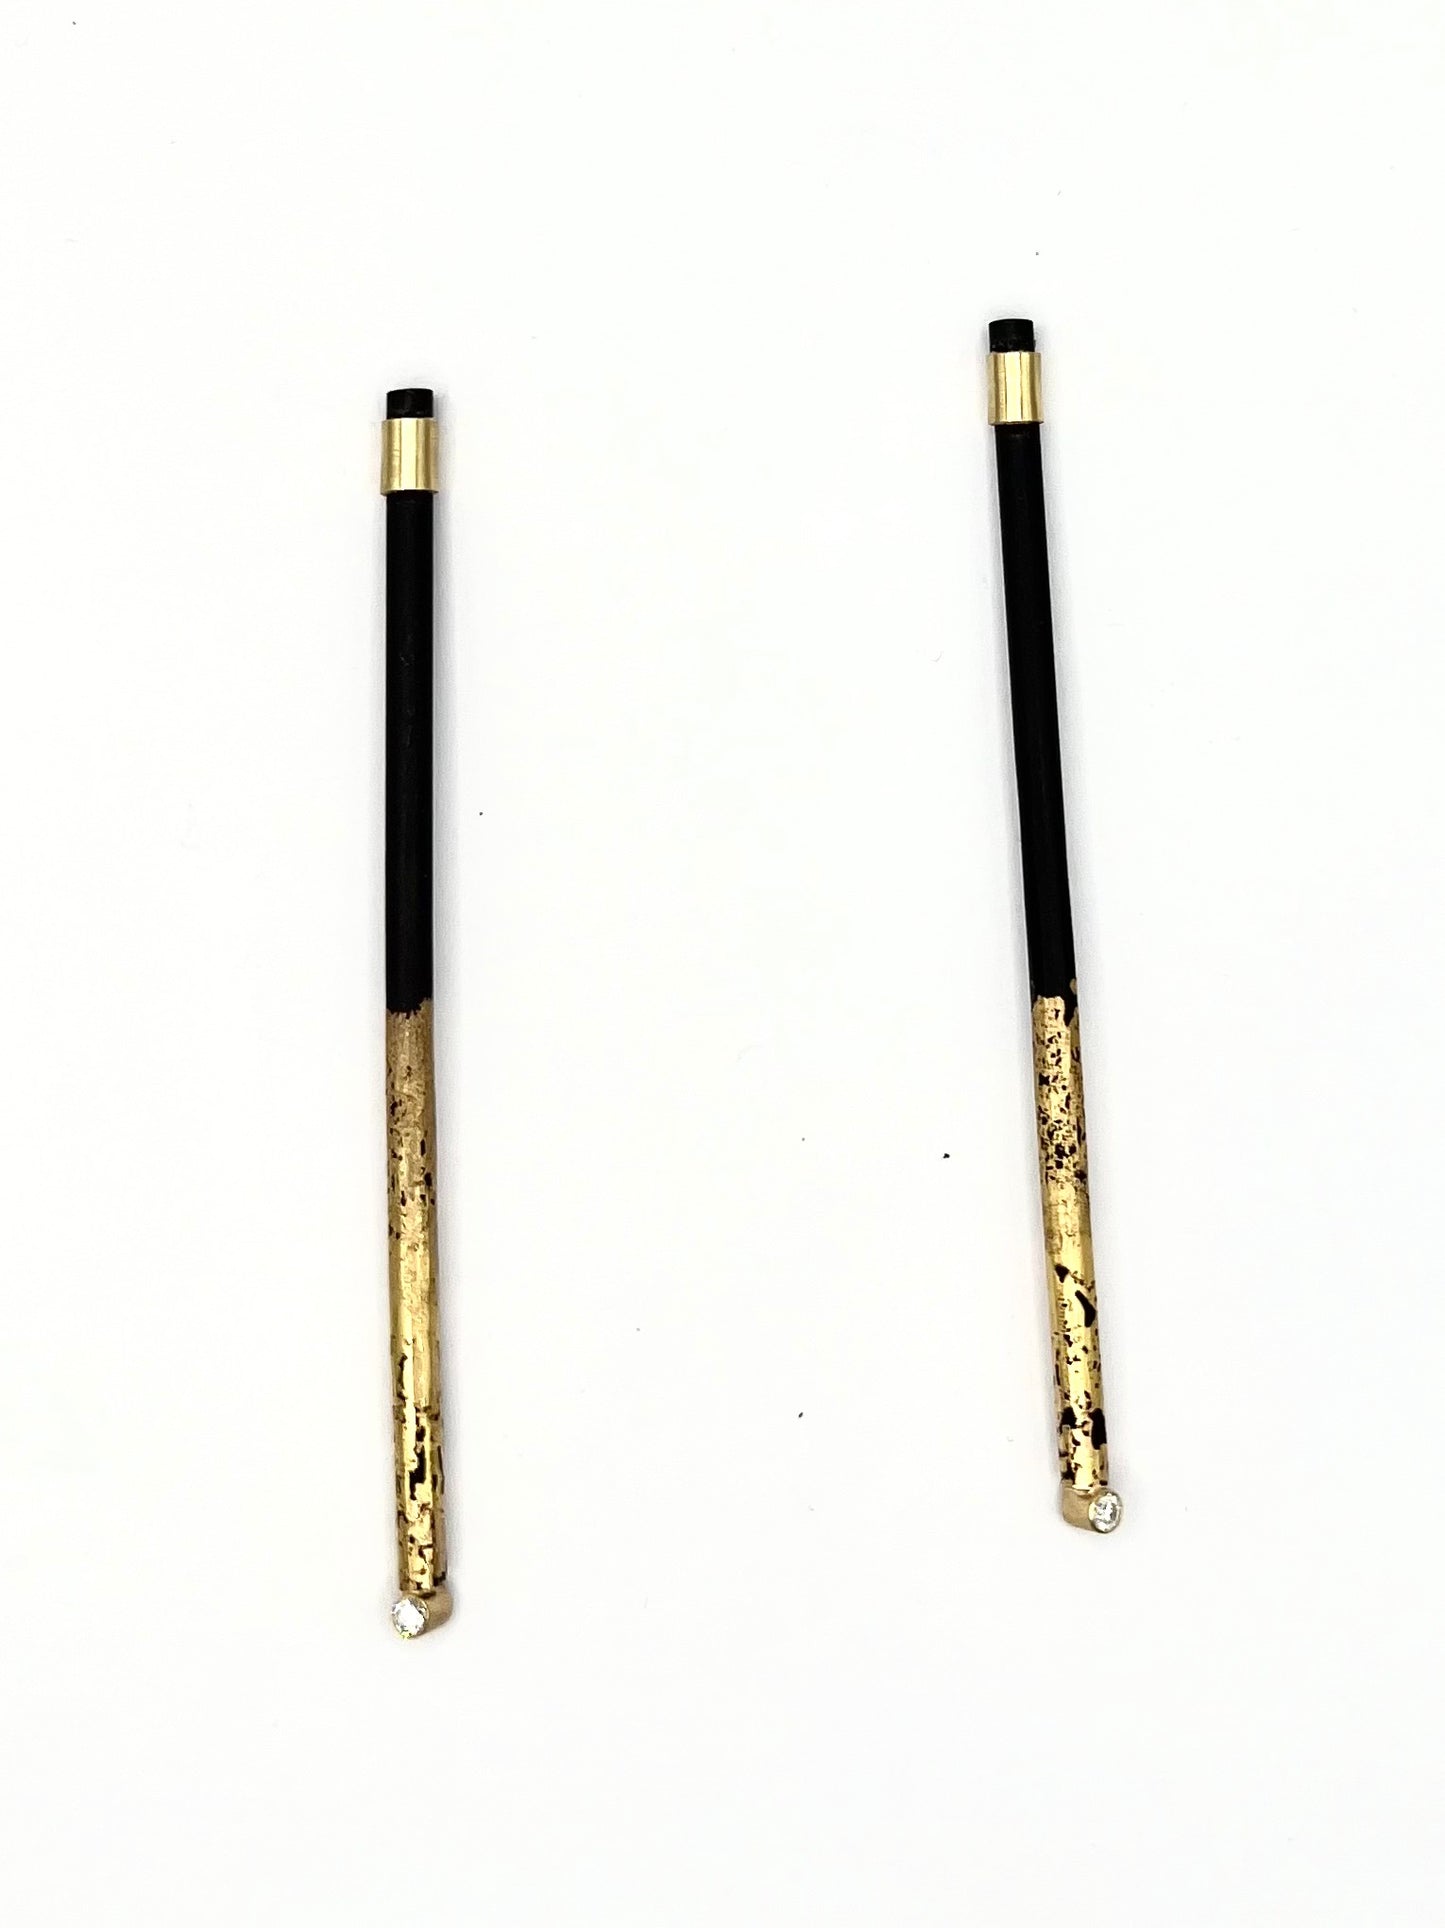 22k Gold and Iron with Diamonds Long Stick Earrings